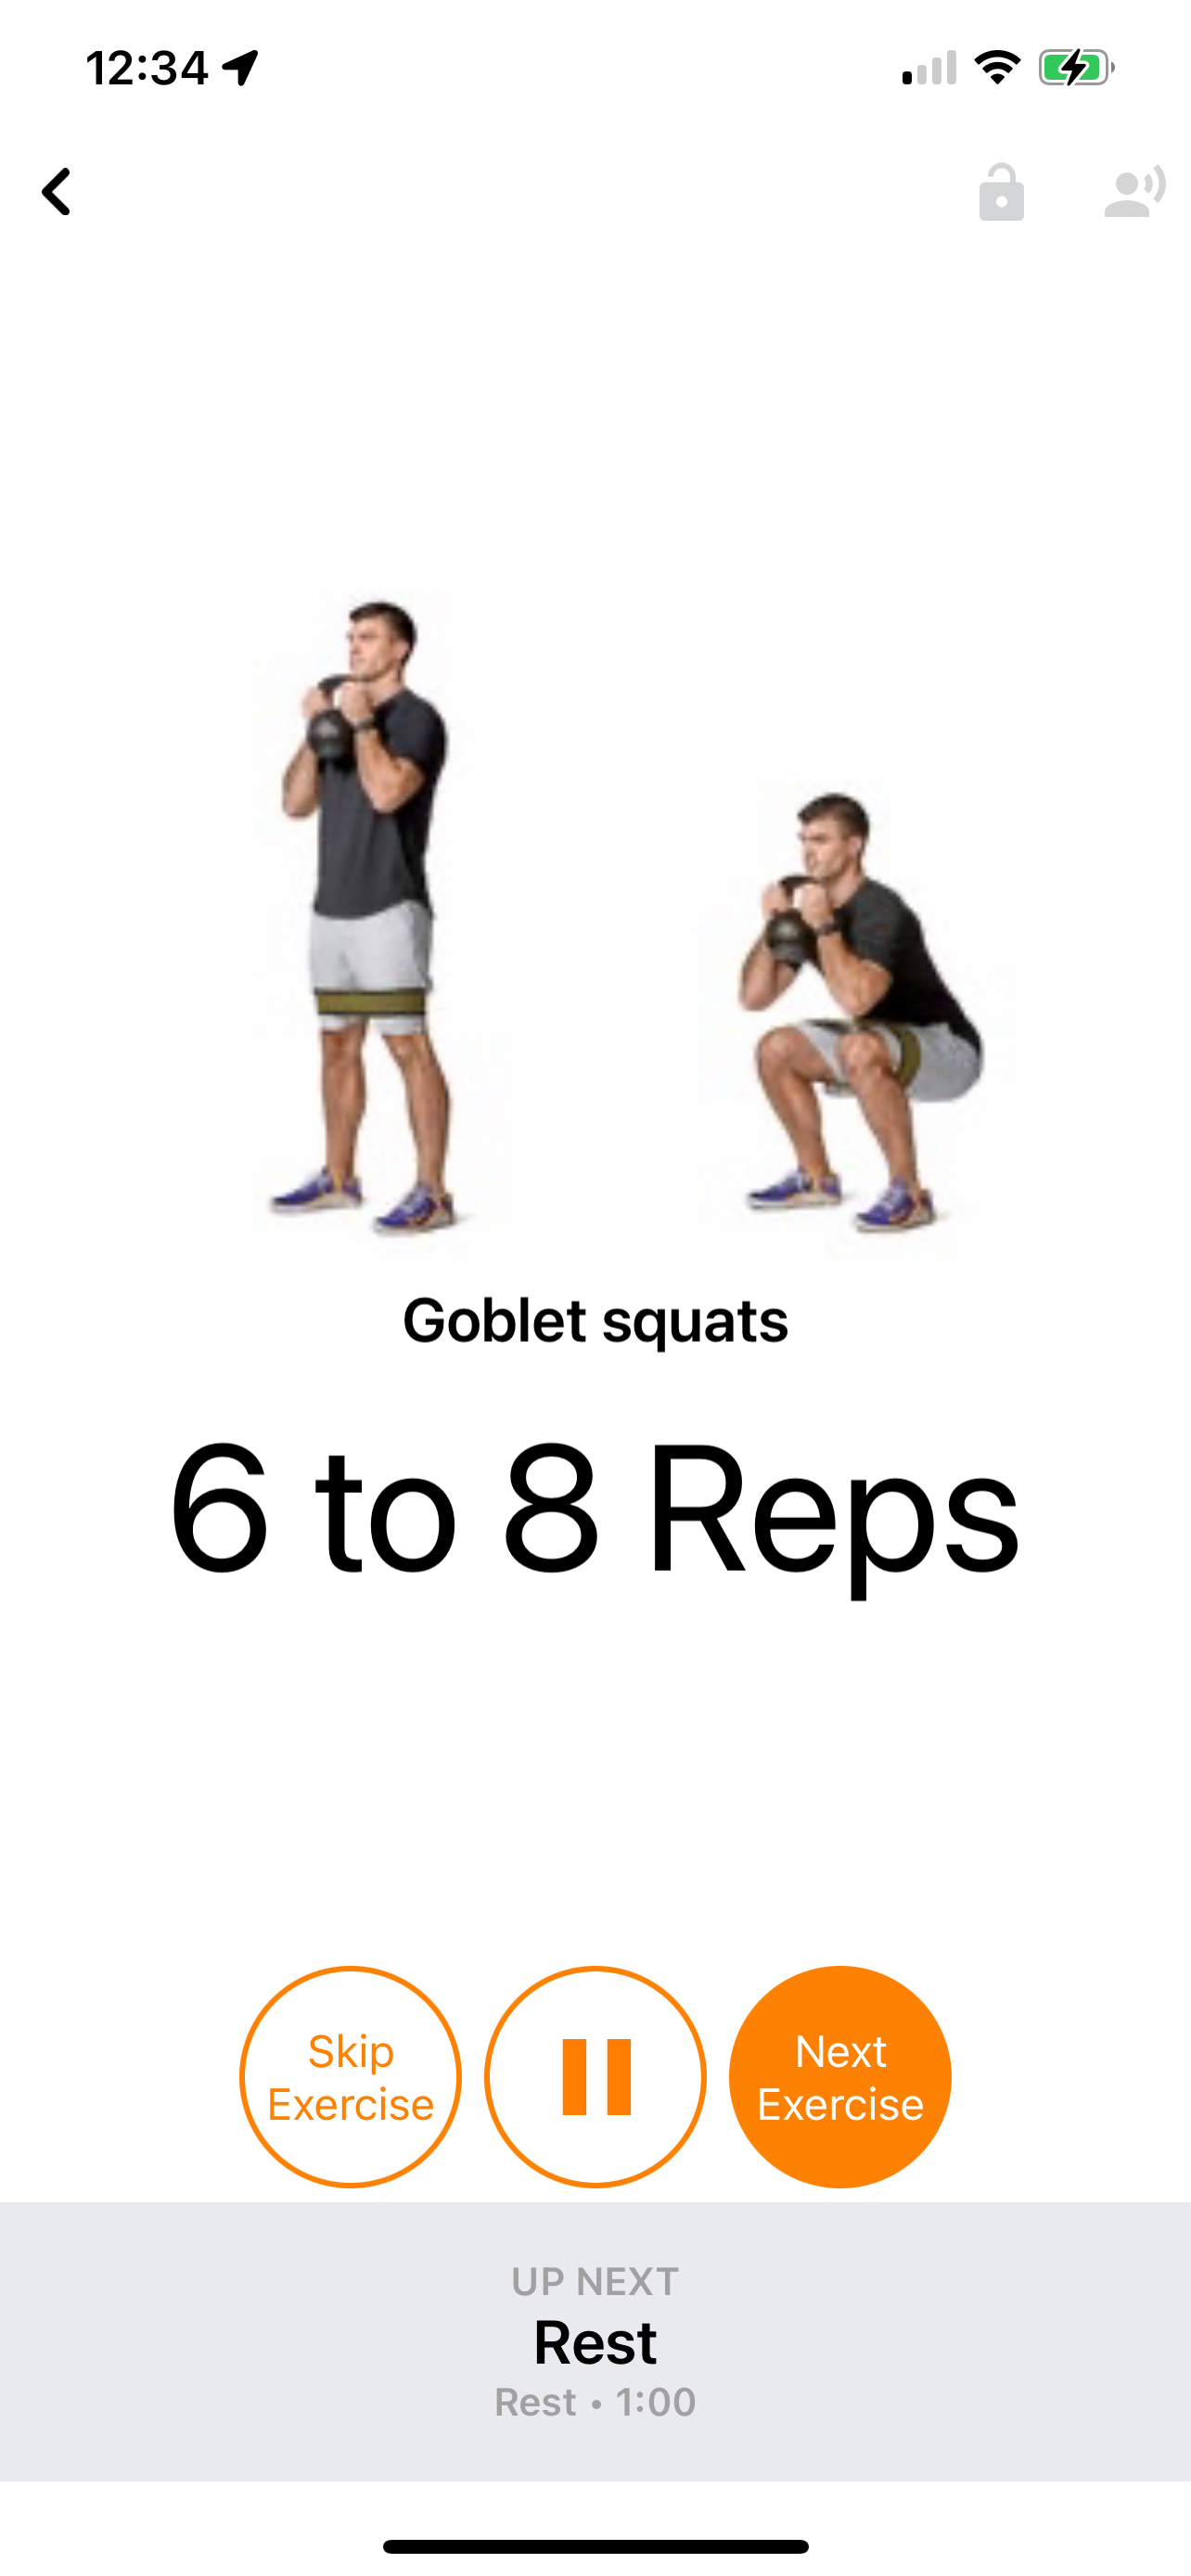 Share-workout